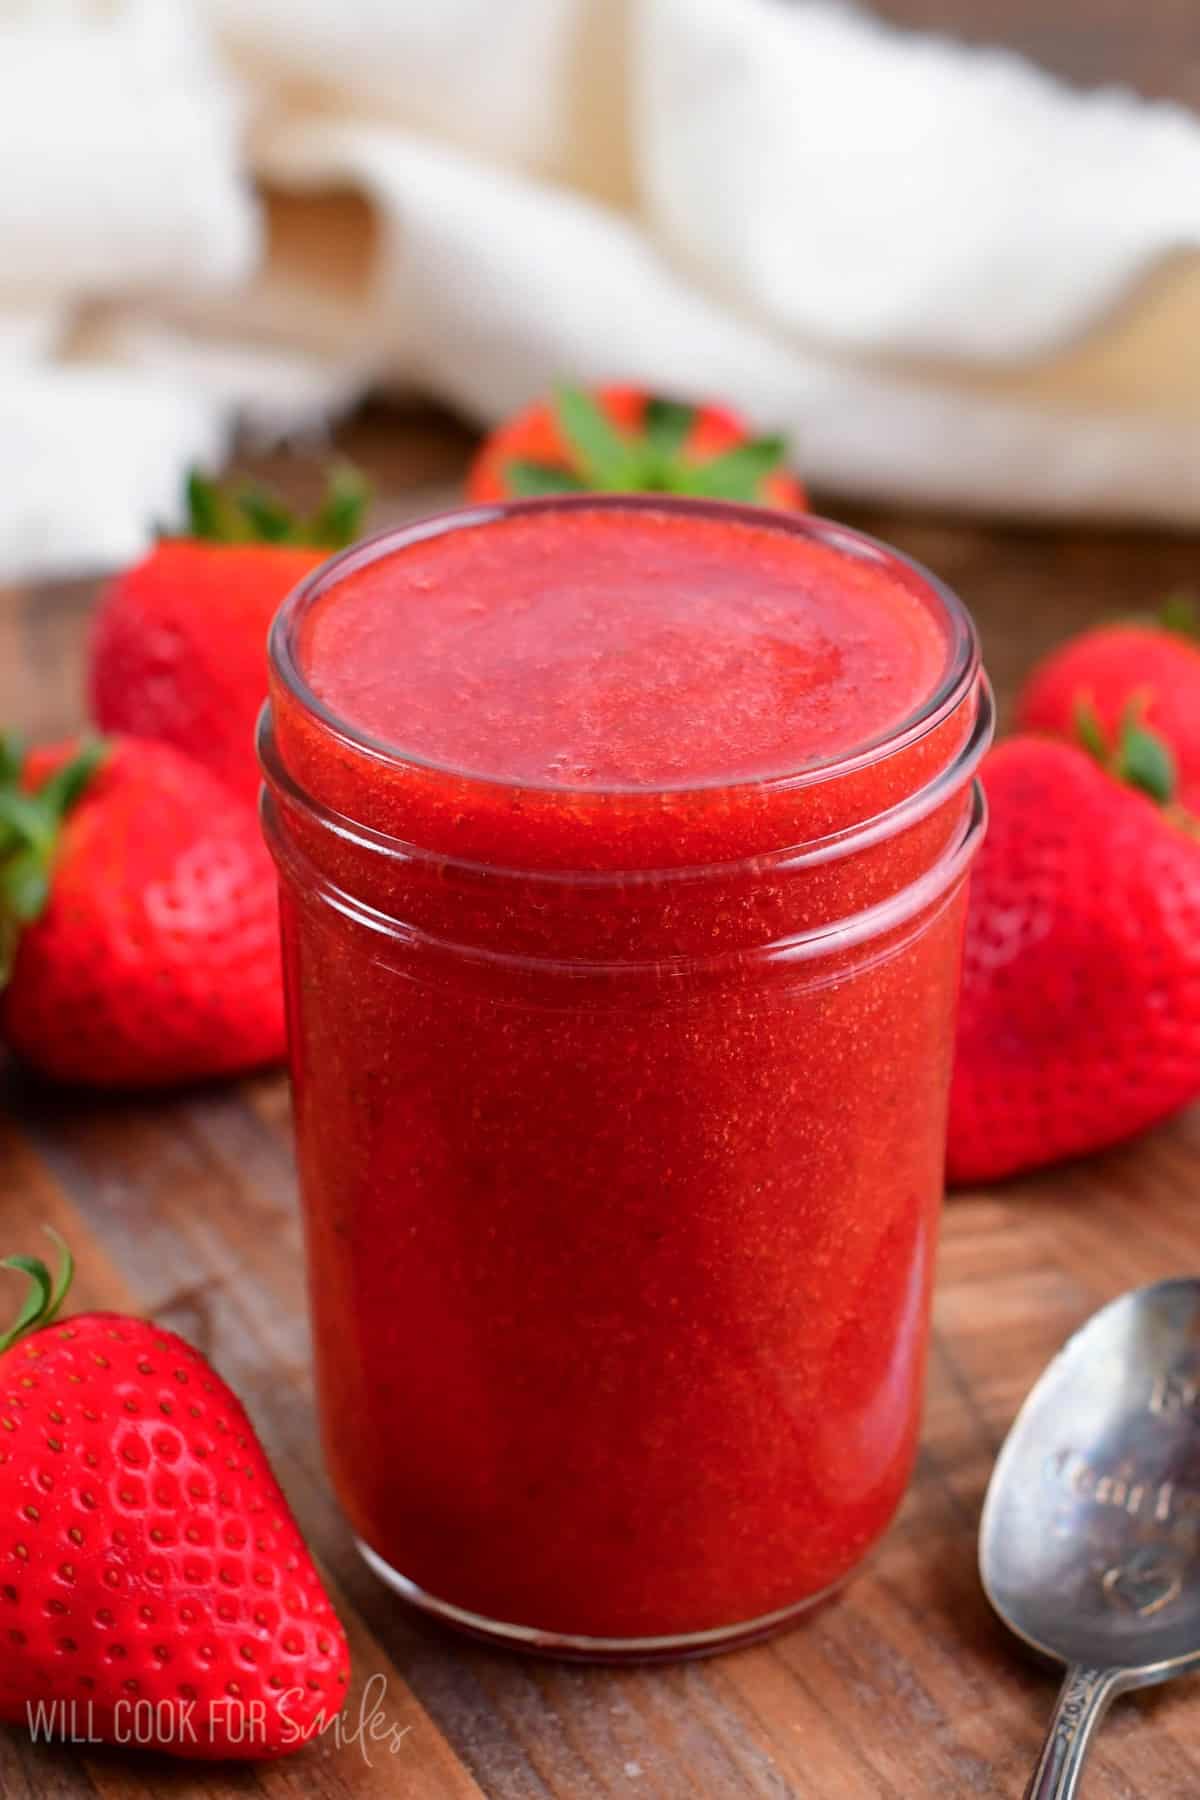 strawberry sauce in a glass jar on a wood surface with strawberries around it.